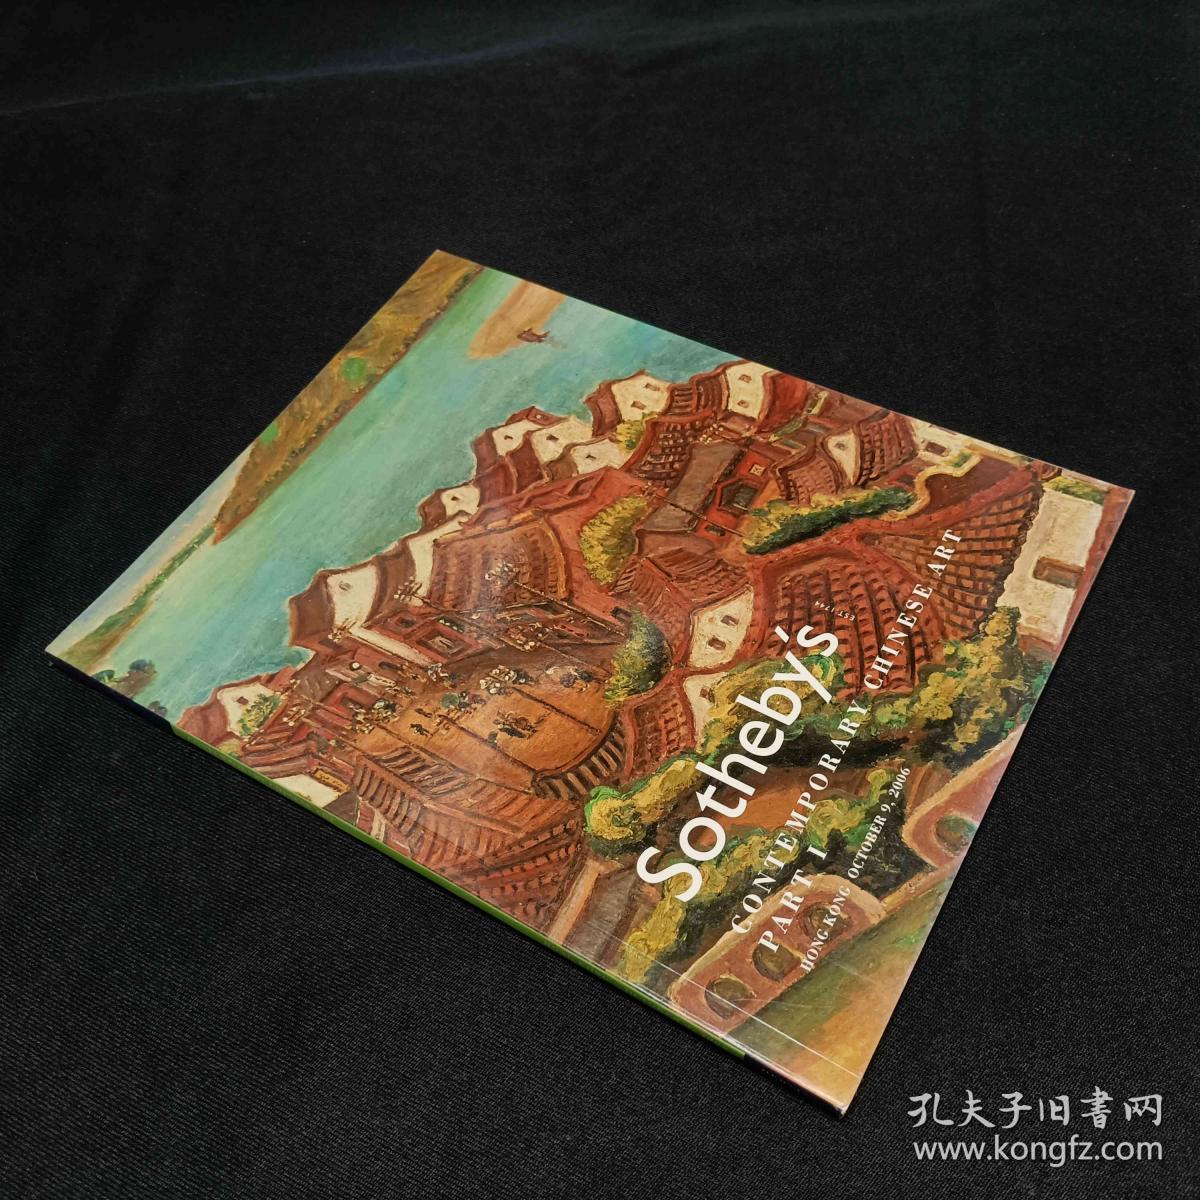 sotheby's：contemporary Chinese art苏富比